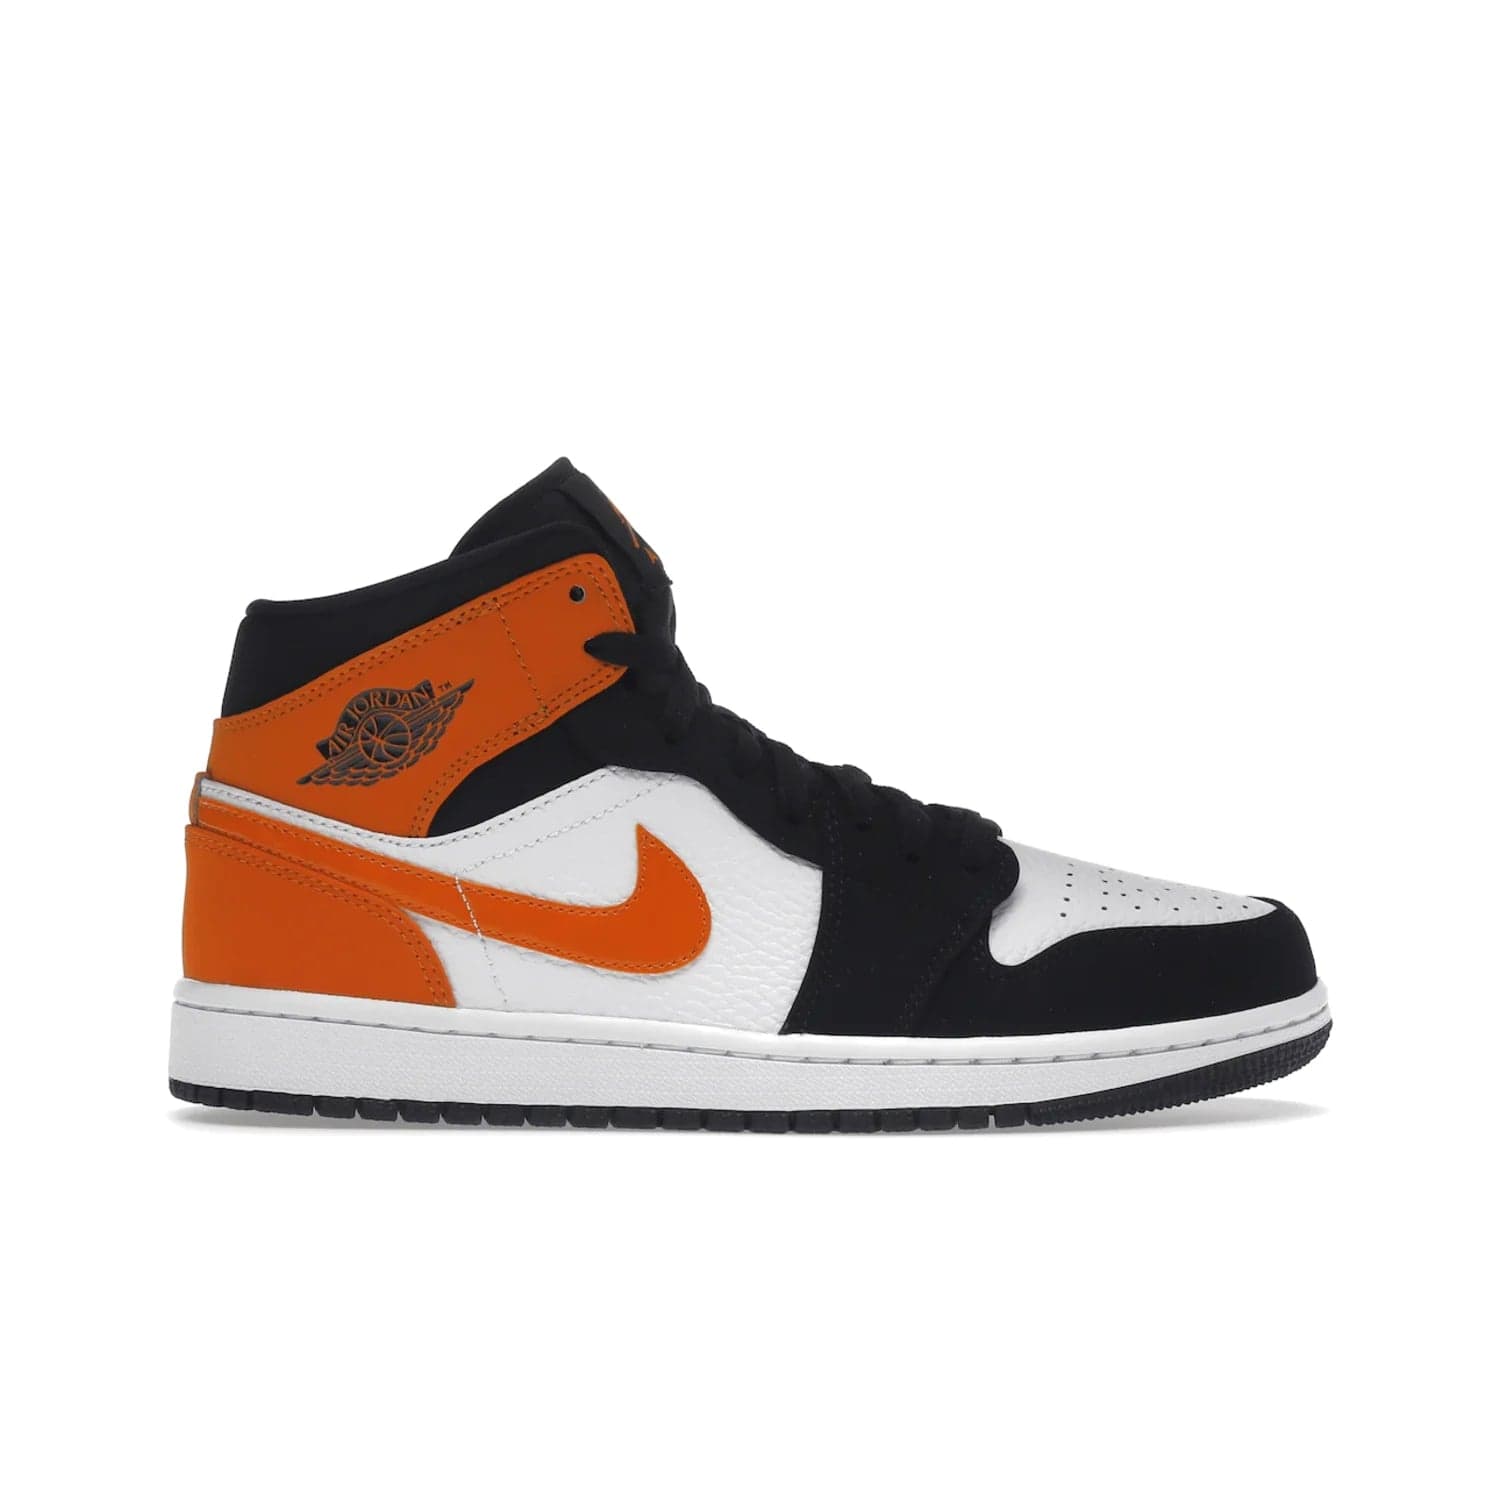 Jordan 1 Mid Shattered Backboard - Image 1 - Only at www.BallersClubKickz.com - The Air Jordan 1 Mid Shattered Backboard offers a timeless Black/White-Starfish colorway. Classic Swoosh logo and AJ insignia plus a shatterd backboard graphic on the insole. Get your pair today!